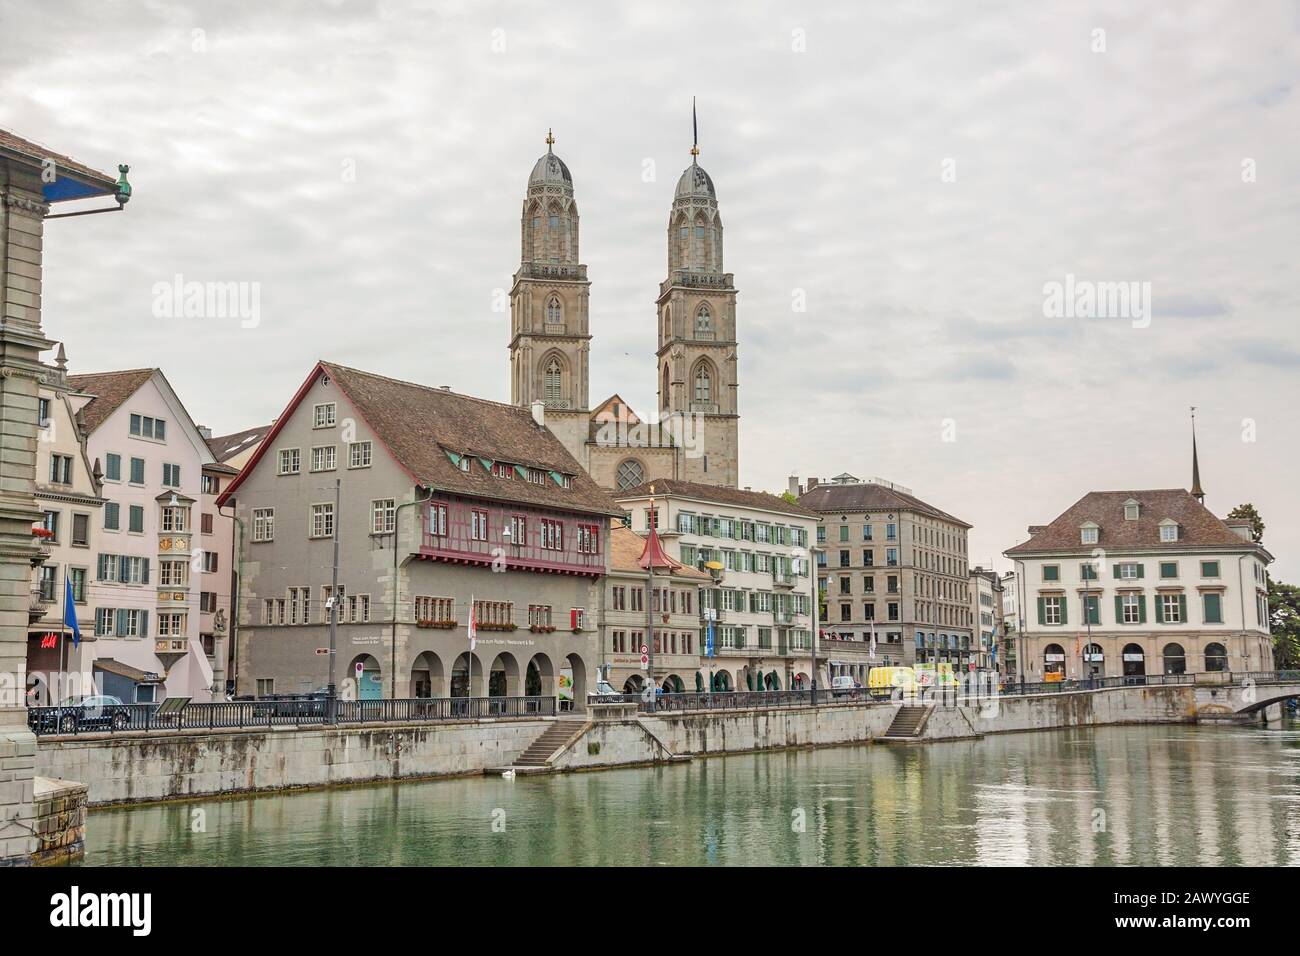 Zurich, Switzerland - June 10, 2017: The Grossmunster is a Romanesque-style Protestant church in Zurich, Switzerland. It is one of the three major chu Stock Photo